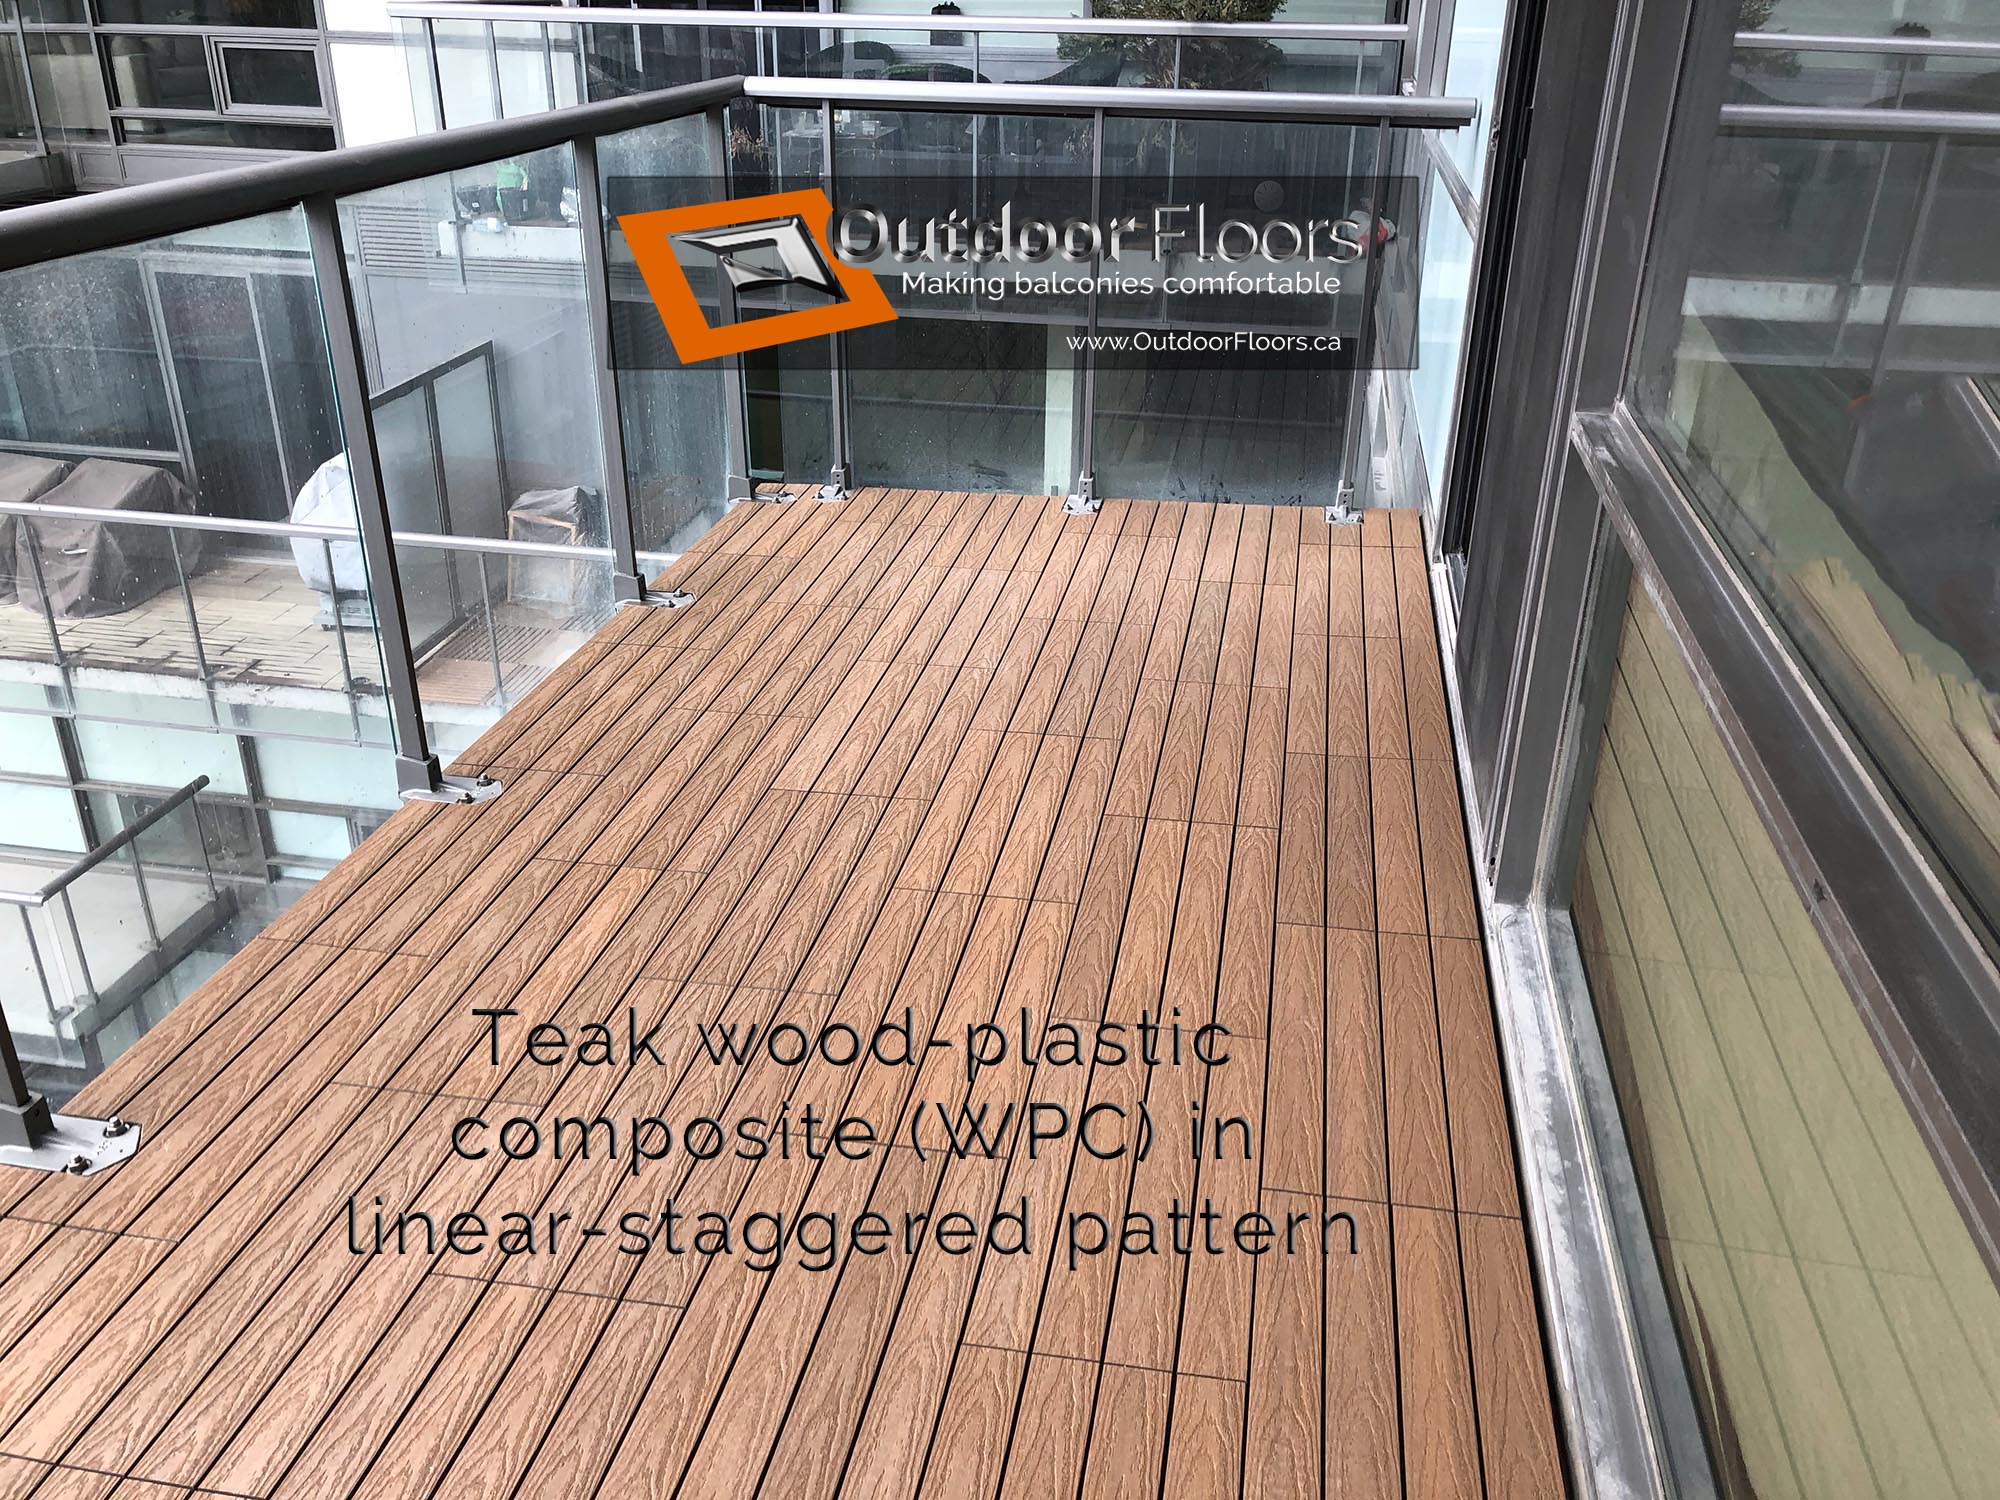 Teak-Wood-Plastic-Composite-Deck-Tiles-on-Balcony-in-Linear-Staggered-Pattern-at-OUTDOOR-FLOORS